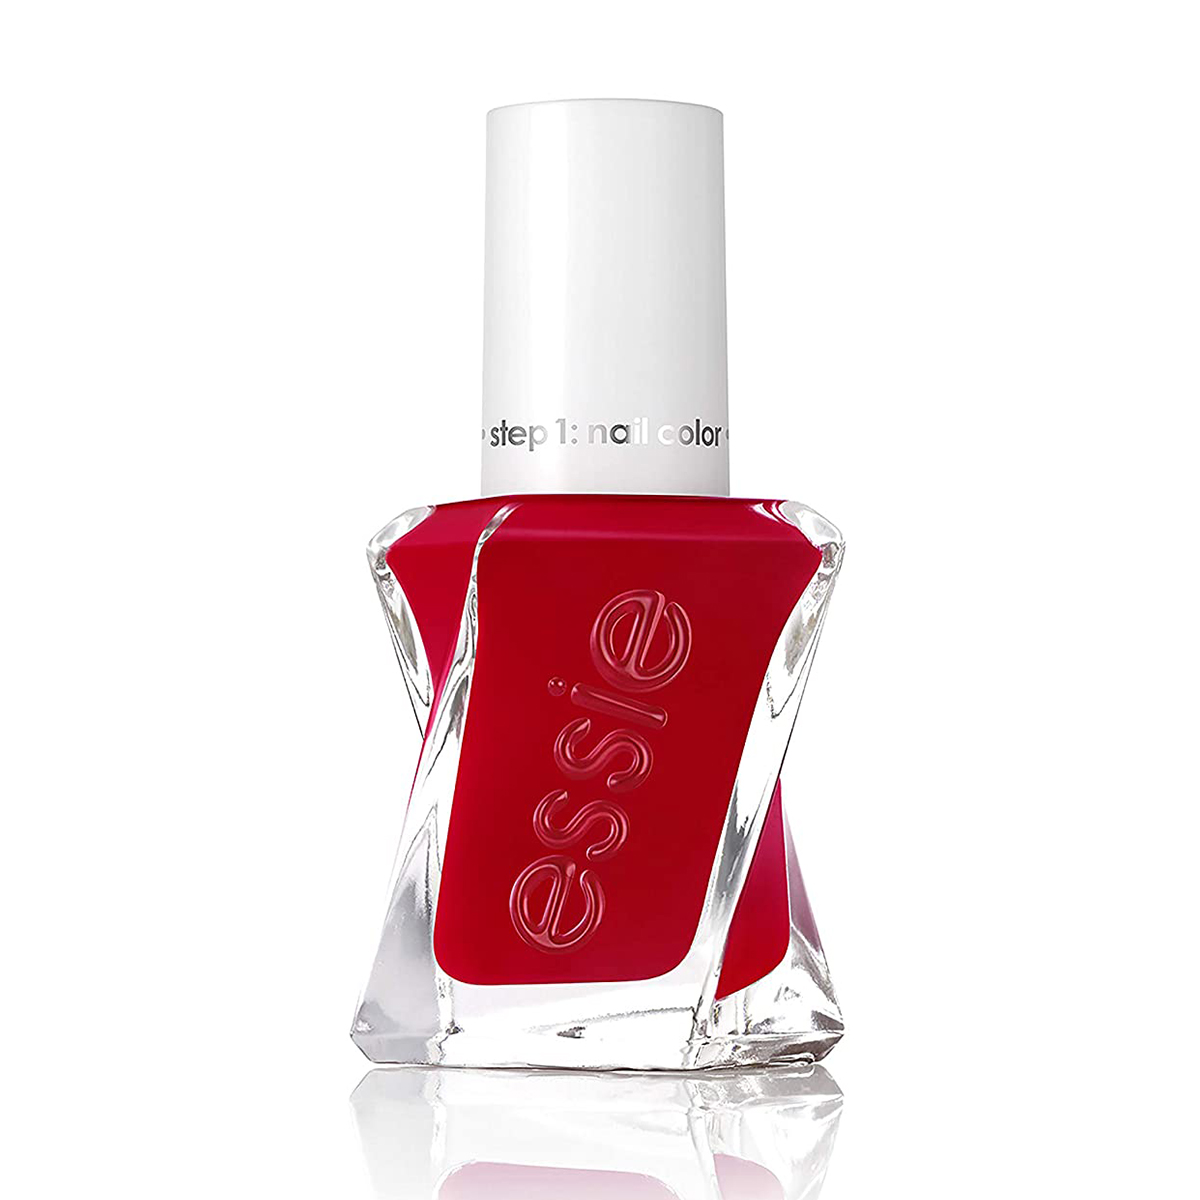  Vernis à ongles Essie Gel Couture en Lady in Red